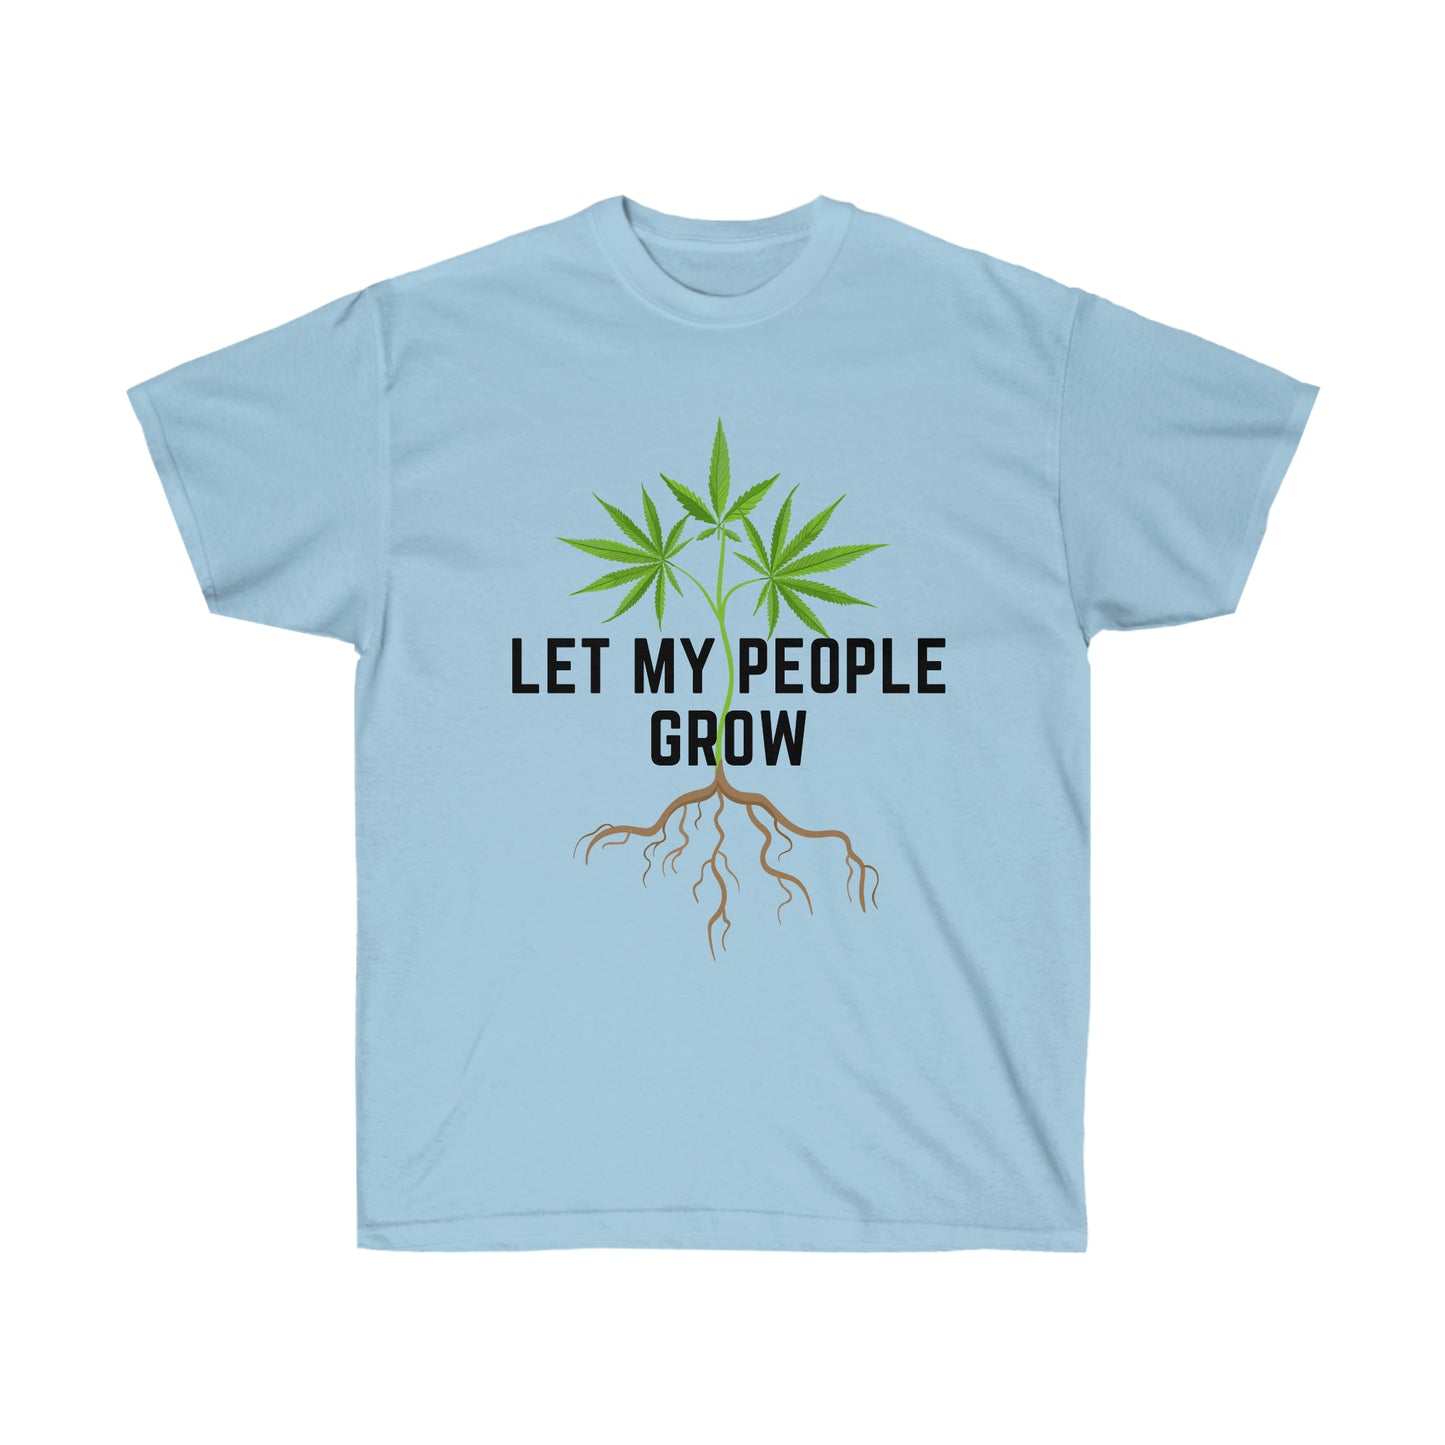 Let the Let My People Grow T-Shirt my people grow t-shirt.